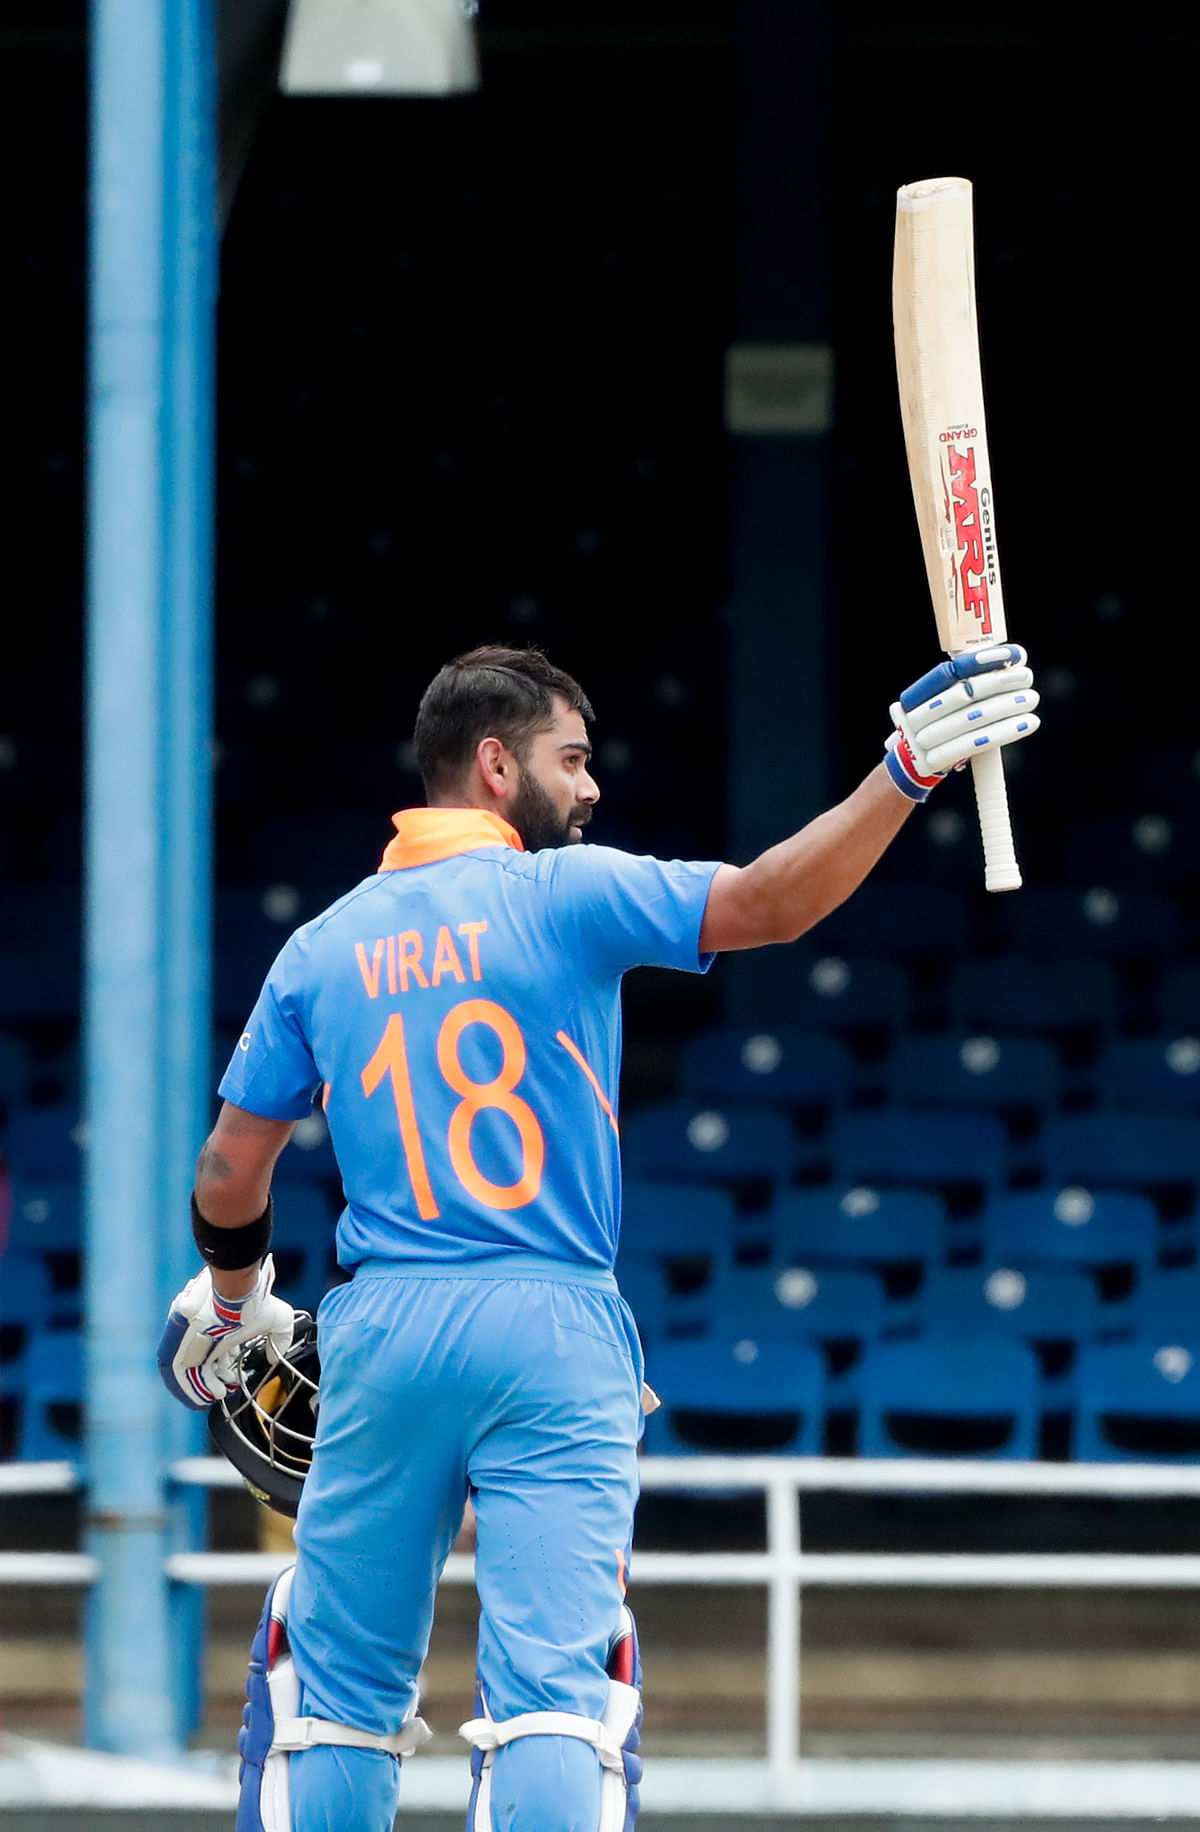 India fielded an unchanged XI for the second One Day International against West Indies at Port of Spain.